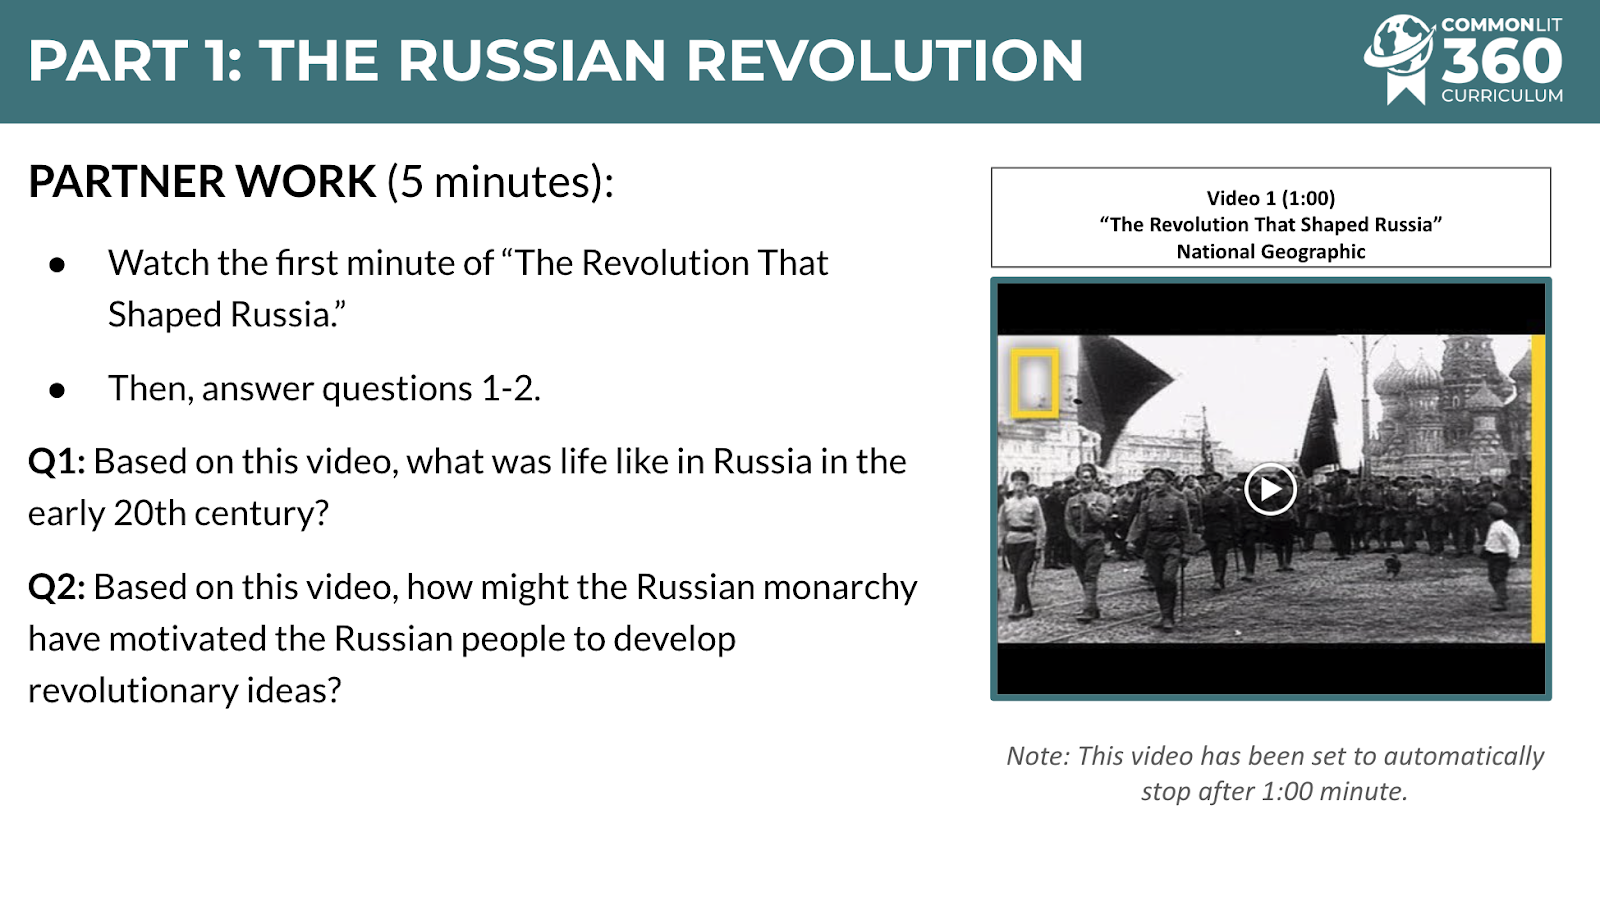 Lesson on The Russian Revolution with video of soldiers